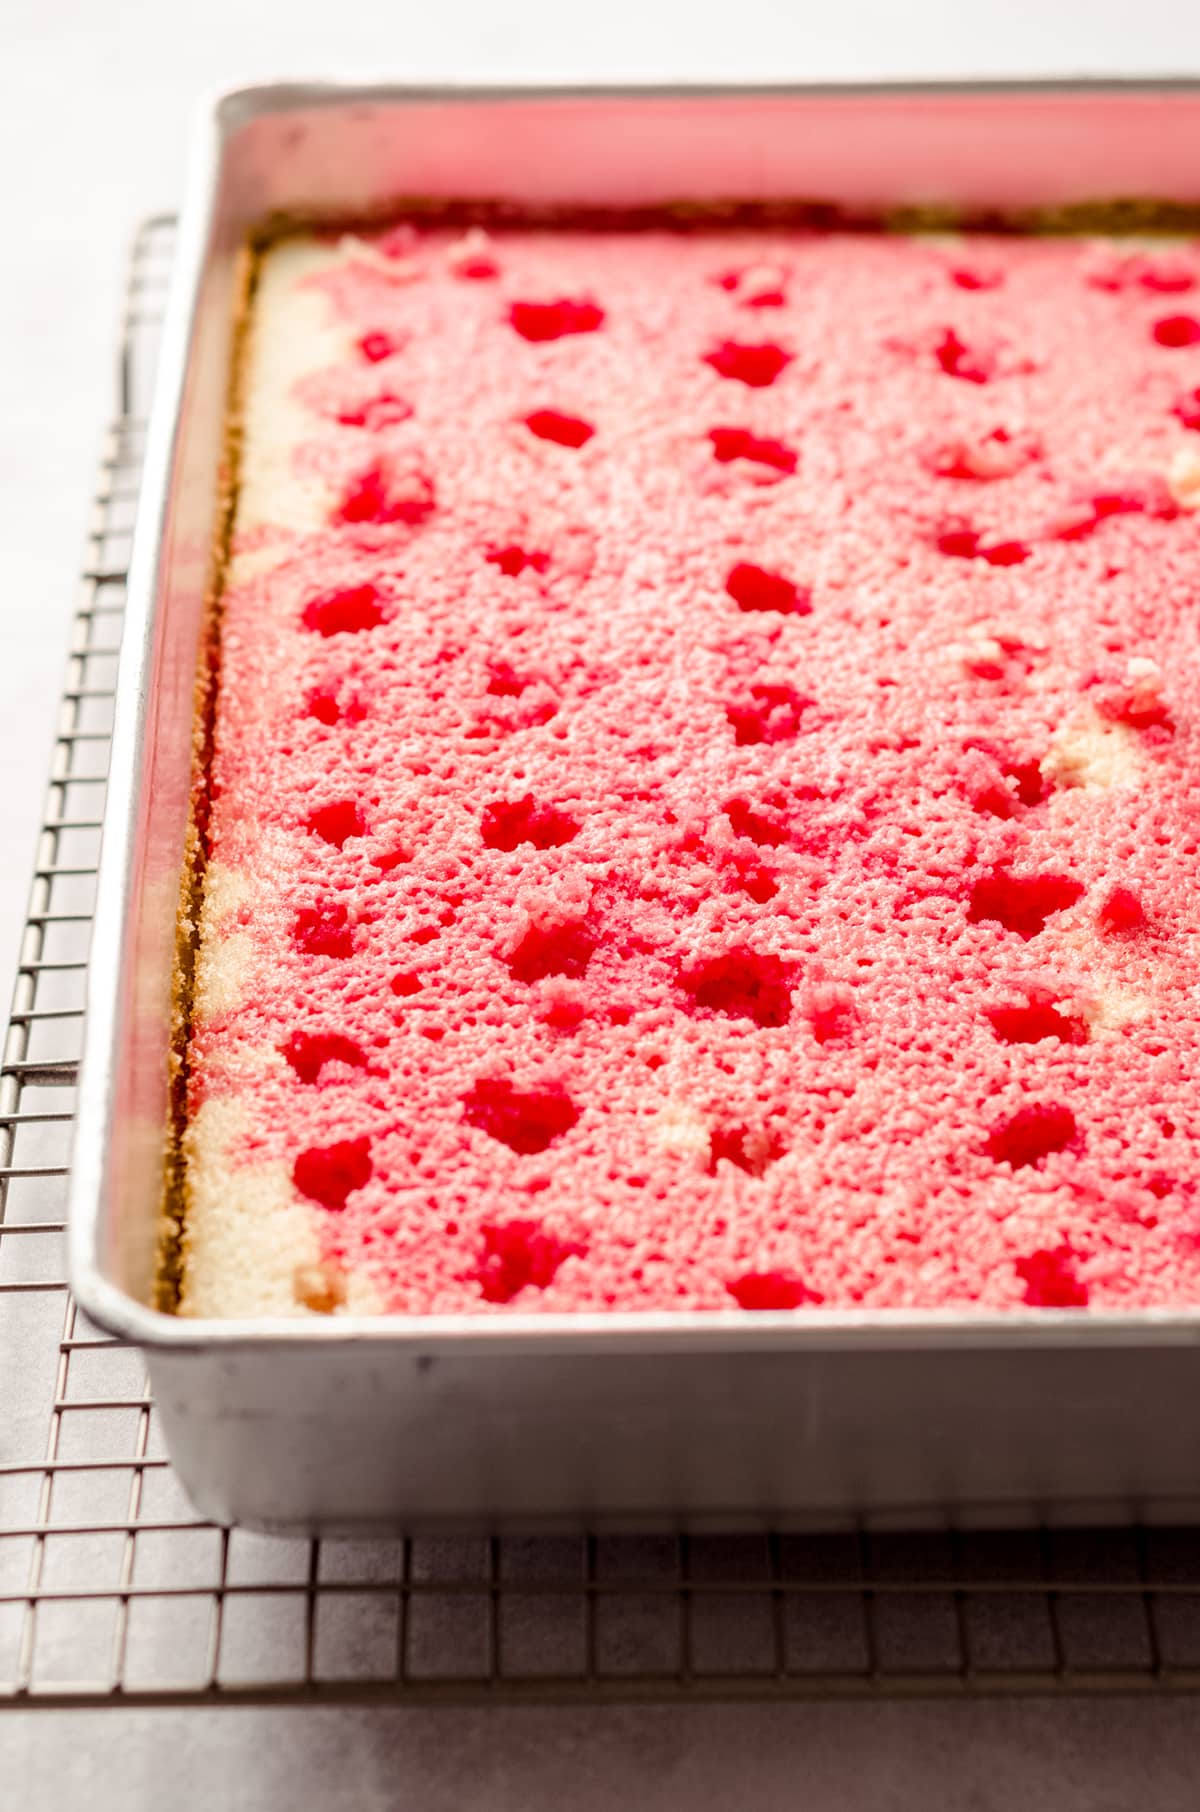 strawberry poke cake with jello poured over it